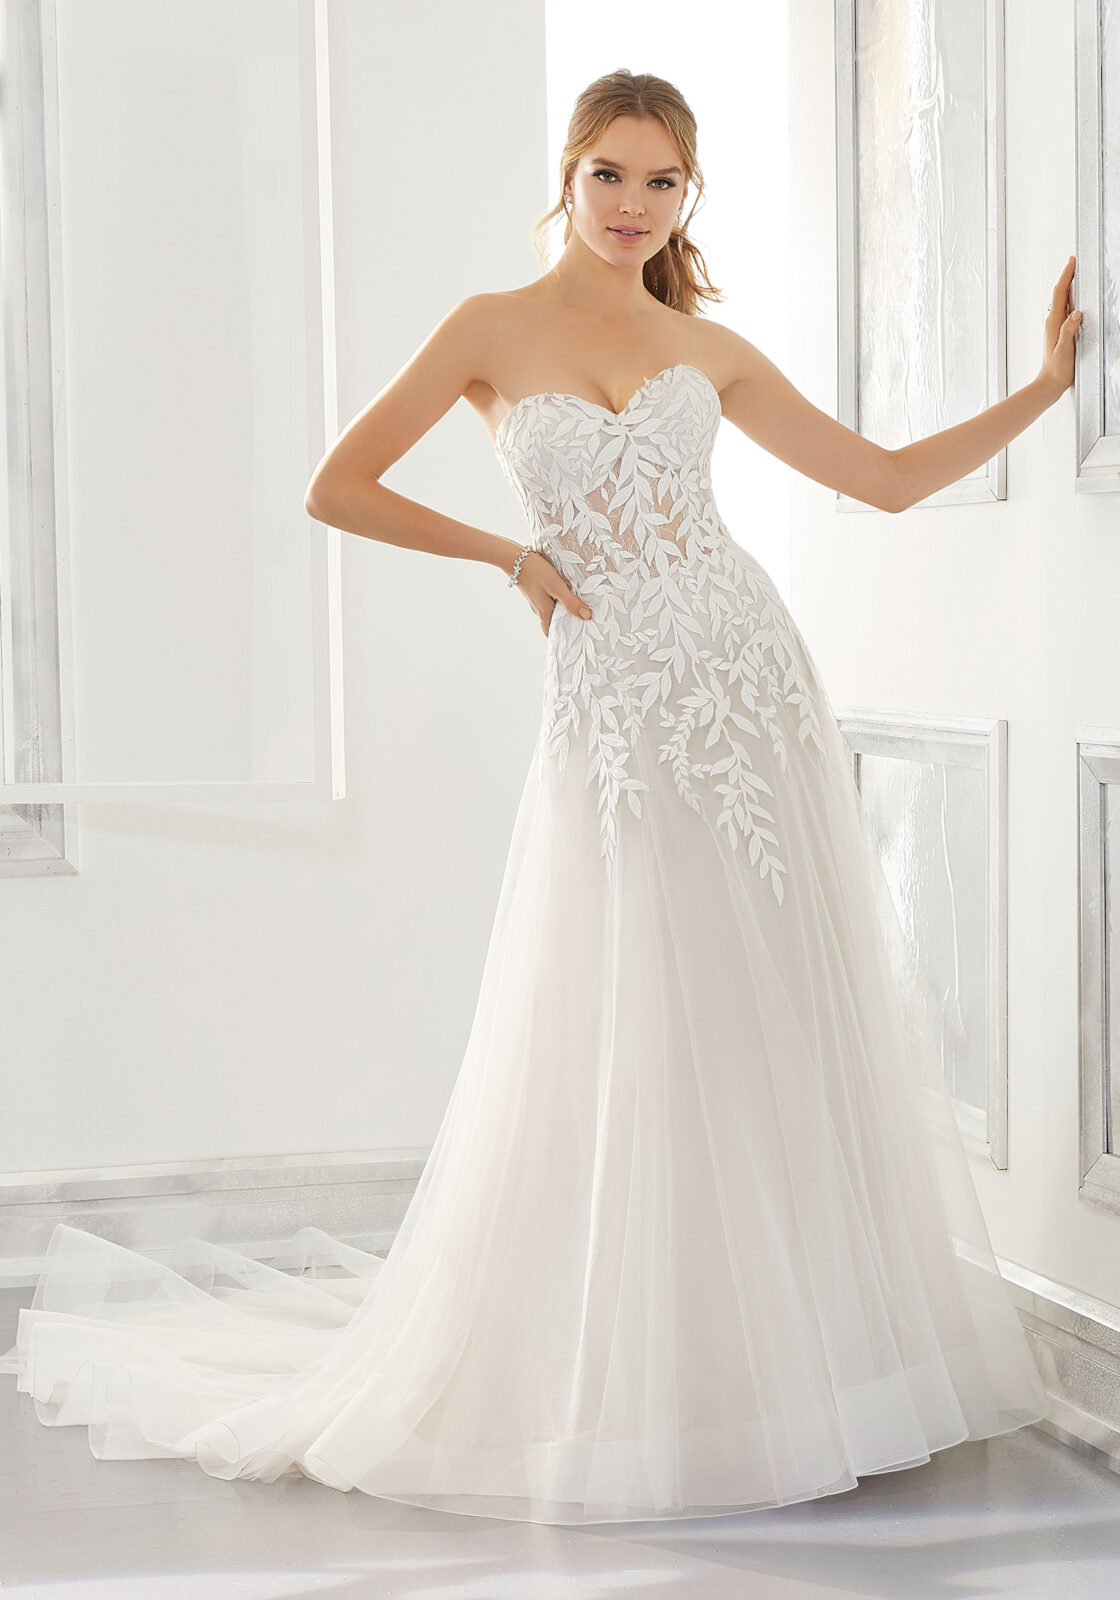 Never worn Morilee Blu 'Azalea' gown in romantic tulle and leaf embroidery  – Recycle Bridal